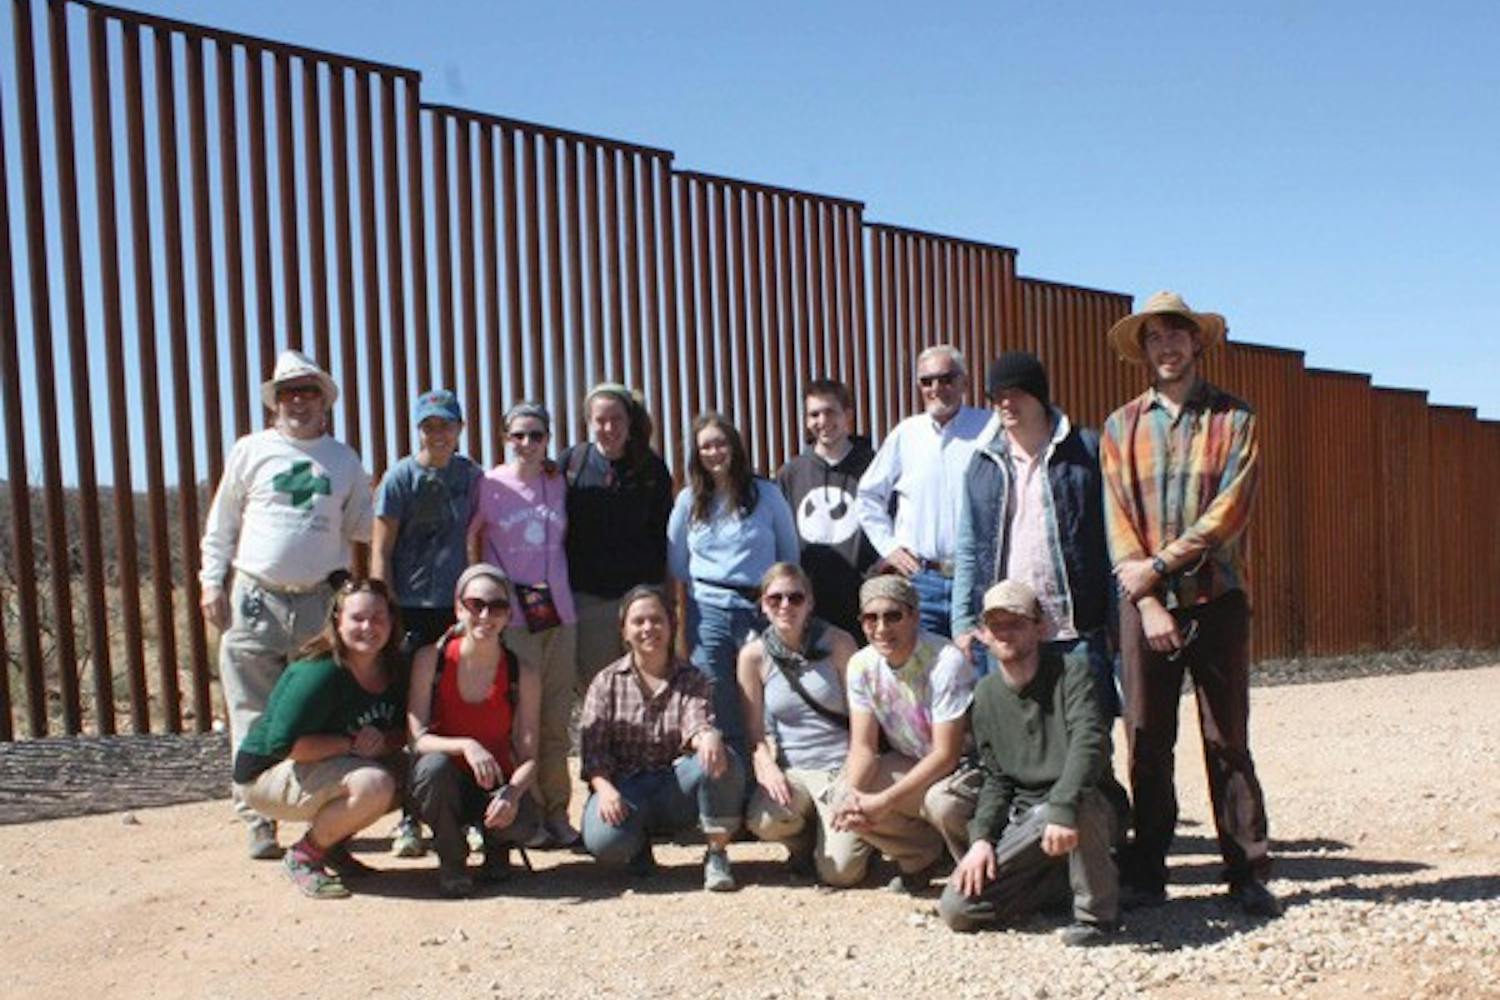 BORDER AWARENESS:  A group of students with the organization No Mas Muertes, or No More Deaths, traveled to the U.S.-Mexico border on a spring break trip to raise awareness for immigrants who face hardships while illegally entering the United States. (Photo courtesy of Benjamin Lang)